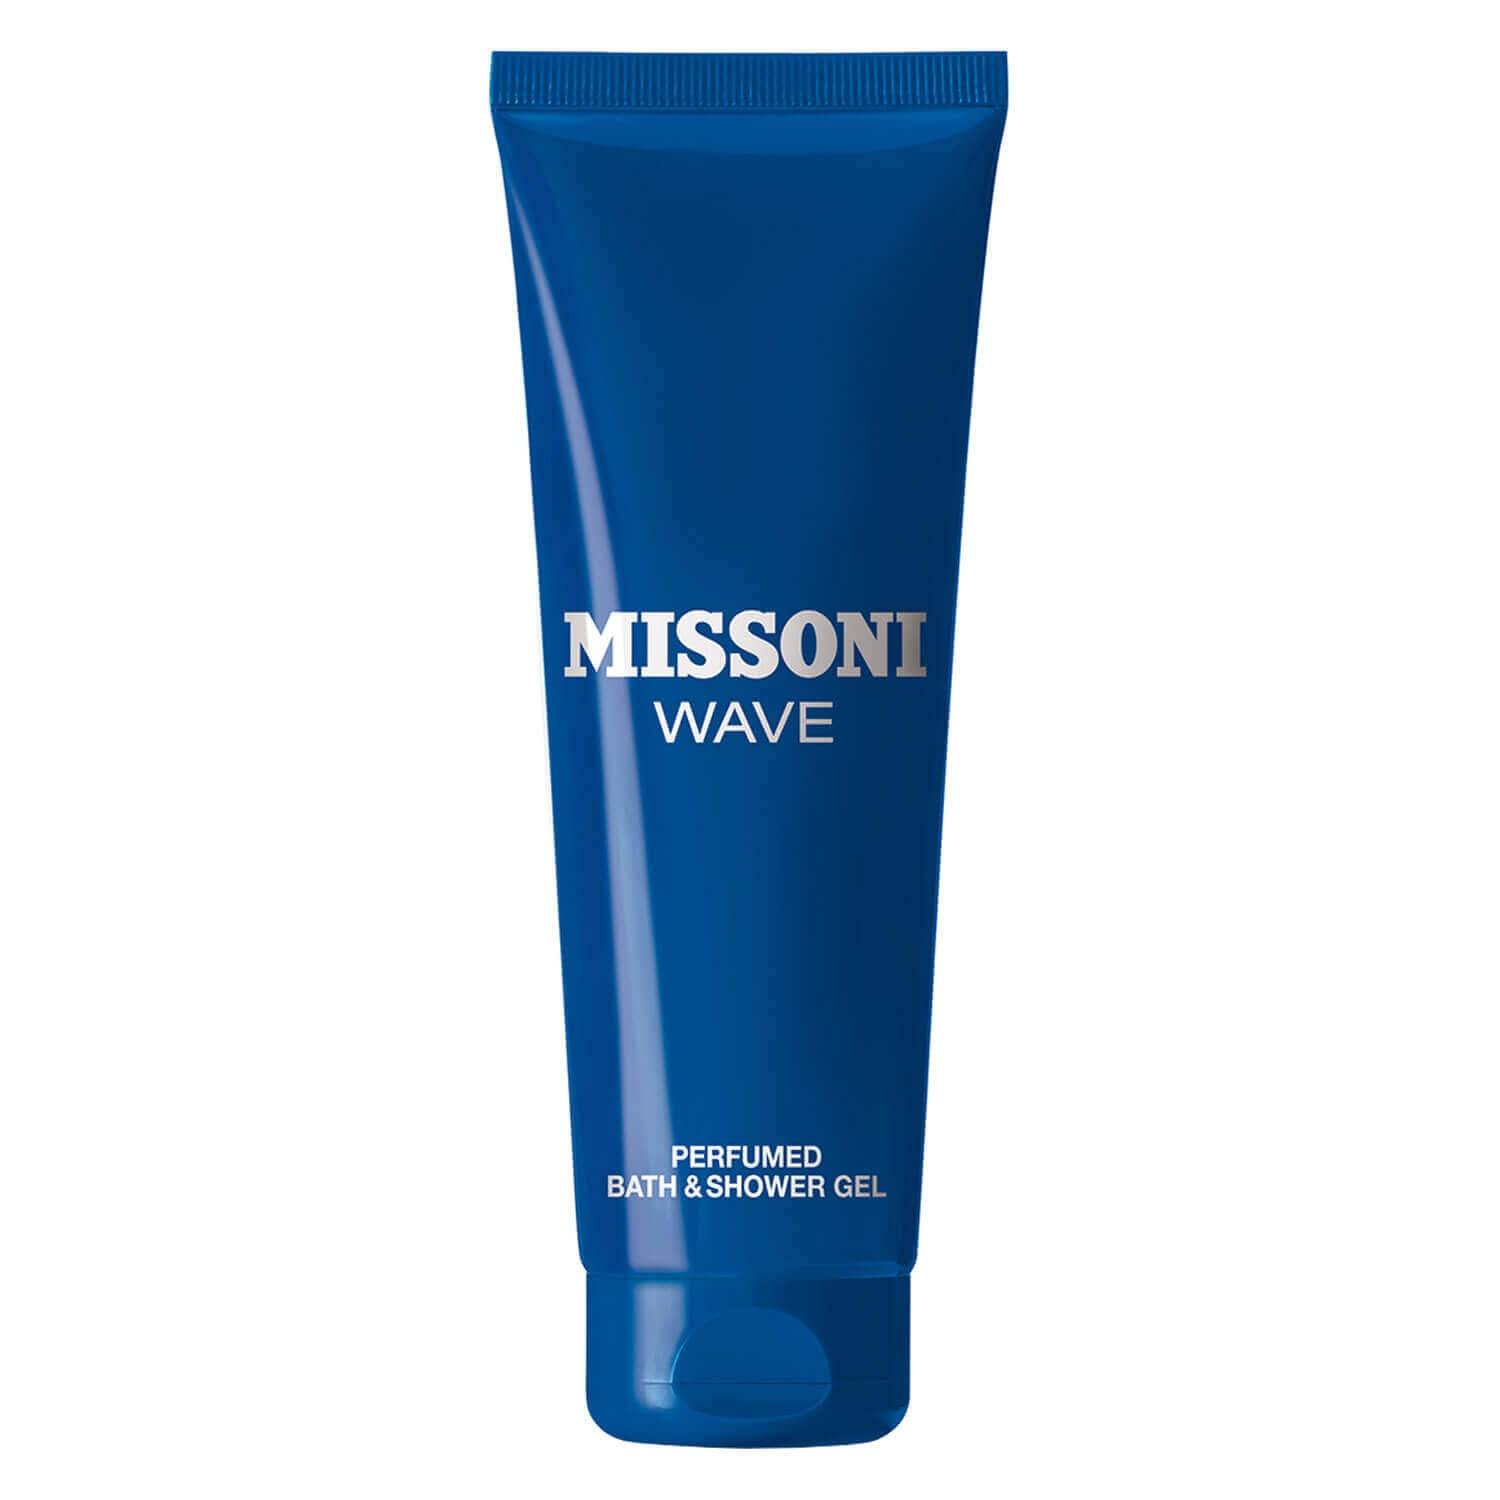 Product image from Missoni Wave - Perfumed Bath & Shower Gel